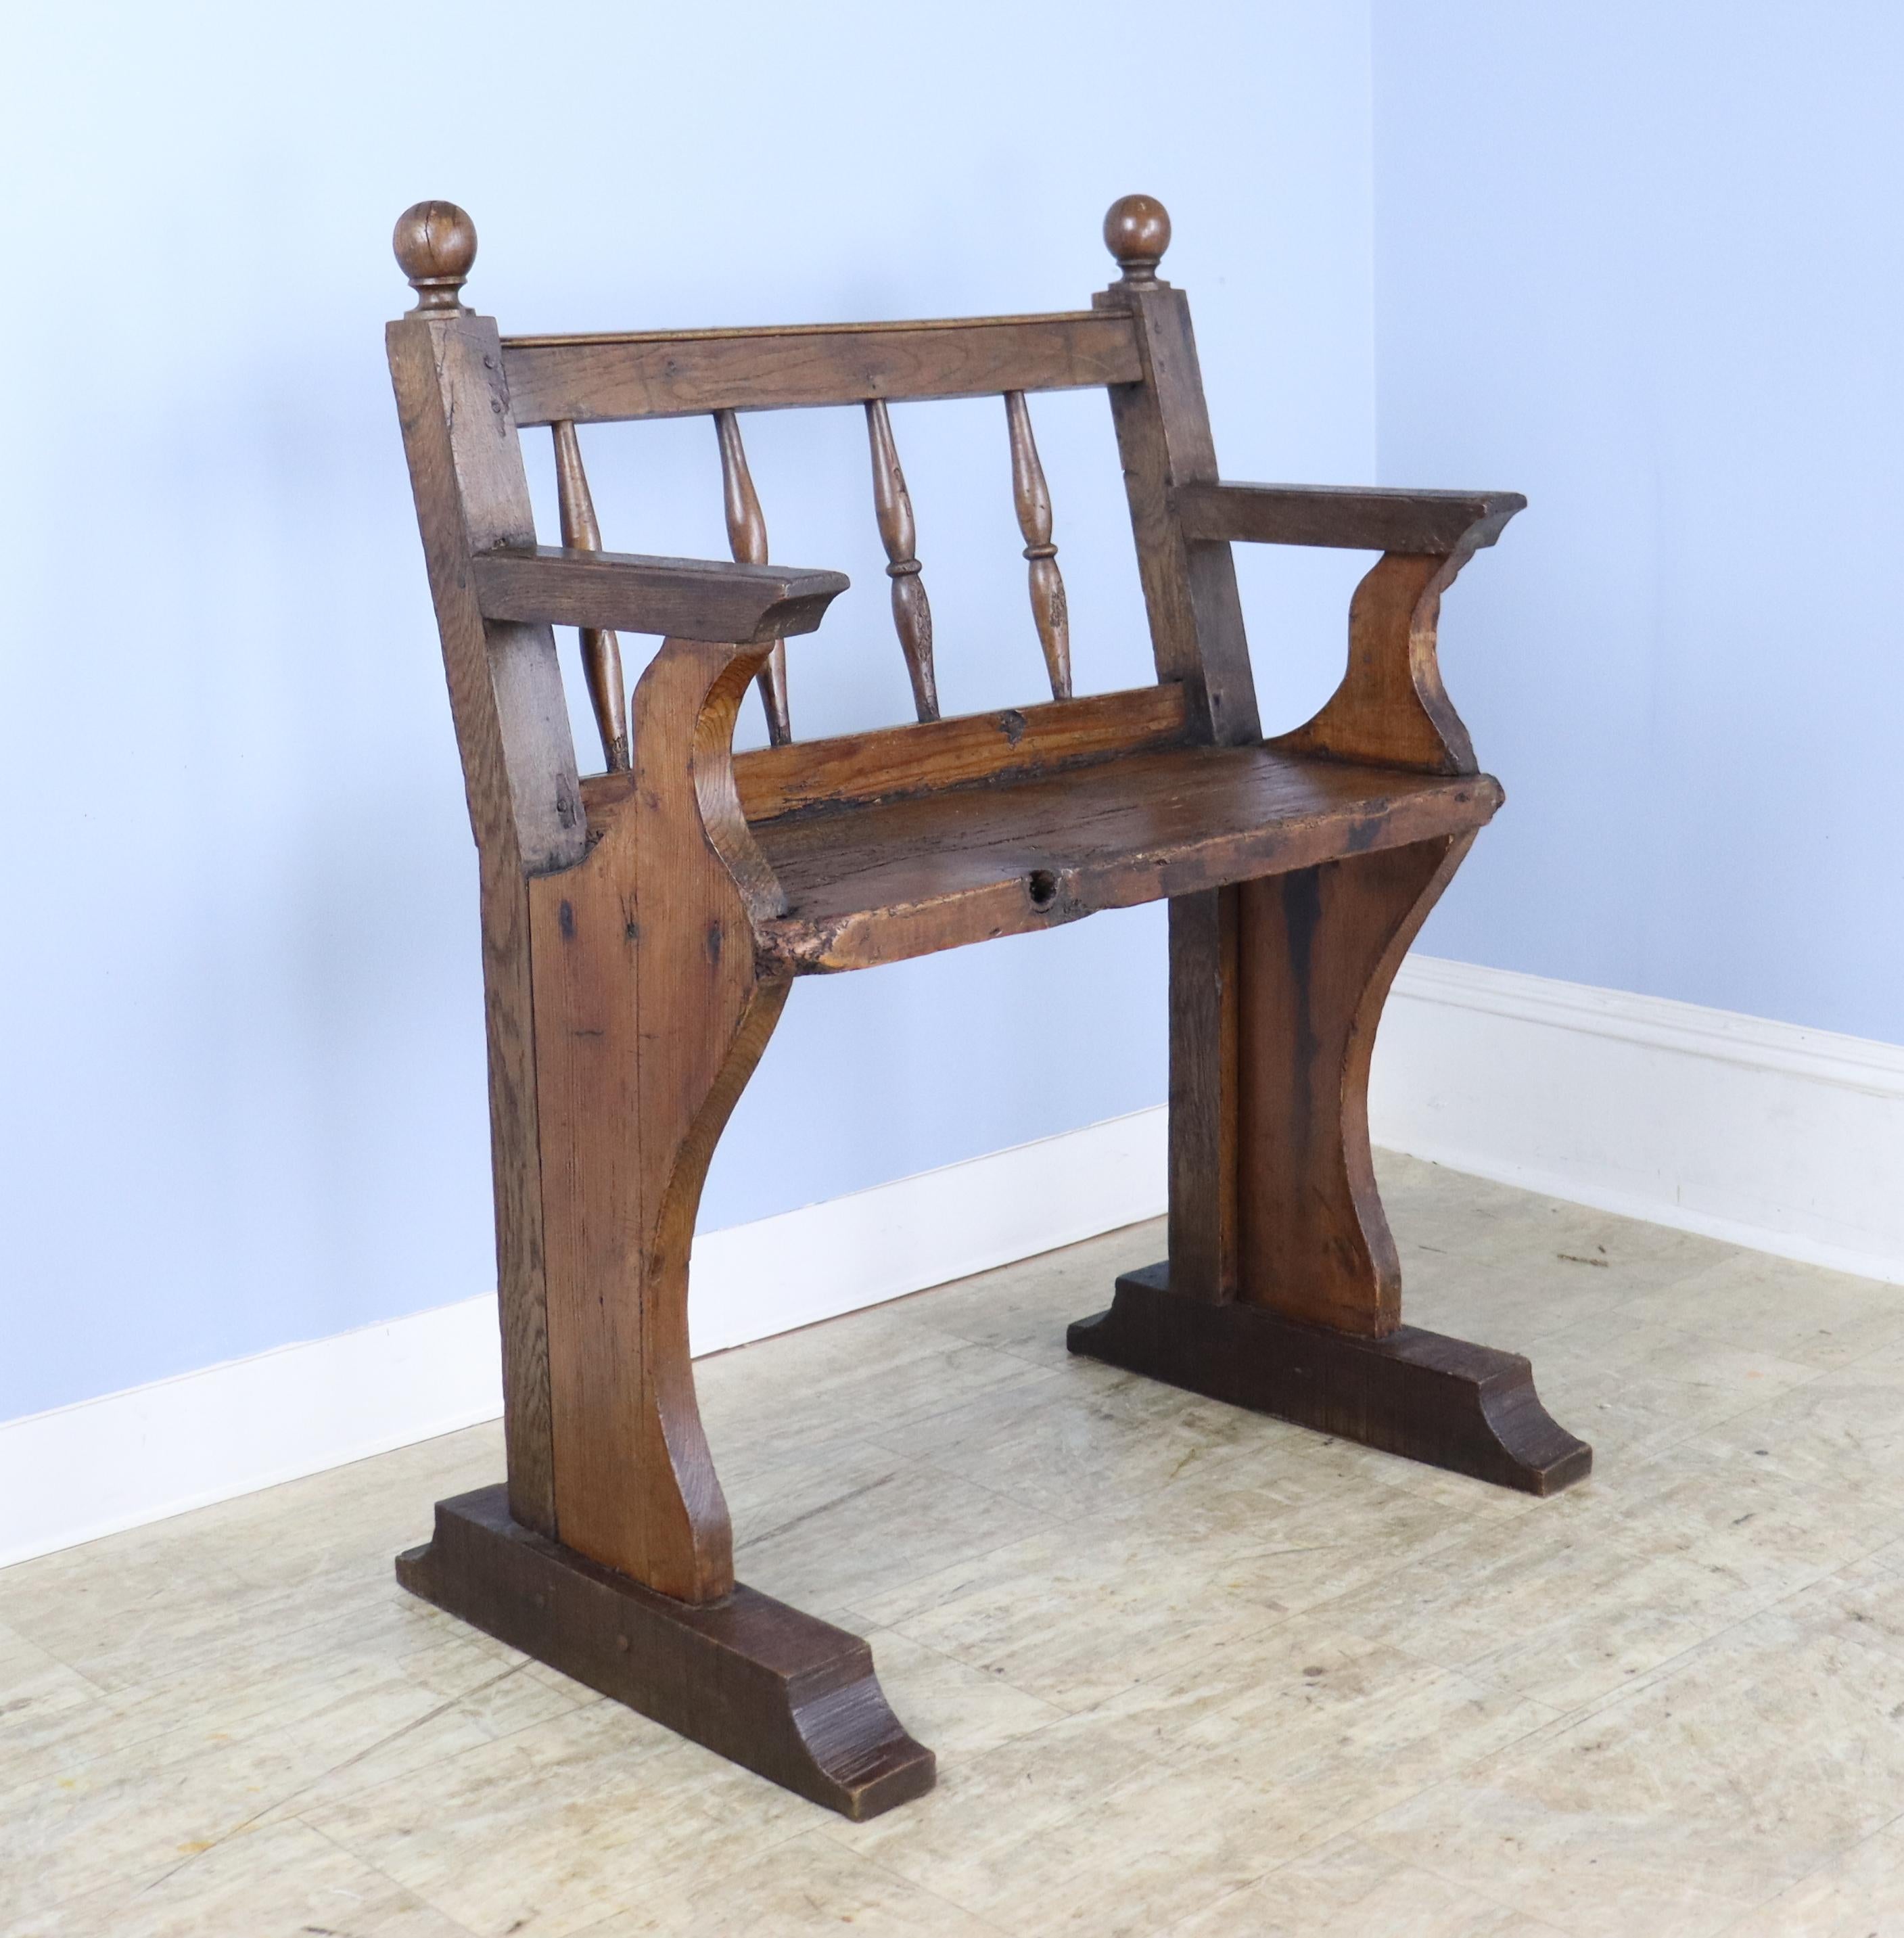 A small distressed oak and pine bench with probable industrial origins, such as a train station.  Charming details include round finials and well articulated spindles on the back.  There is a large natural knothole on the seat, shown in thumbnails.